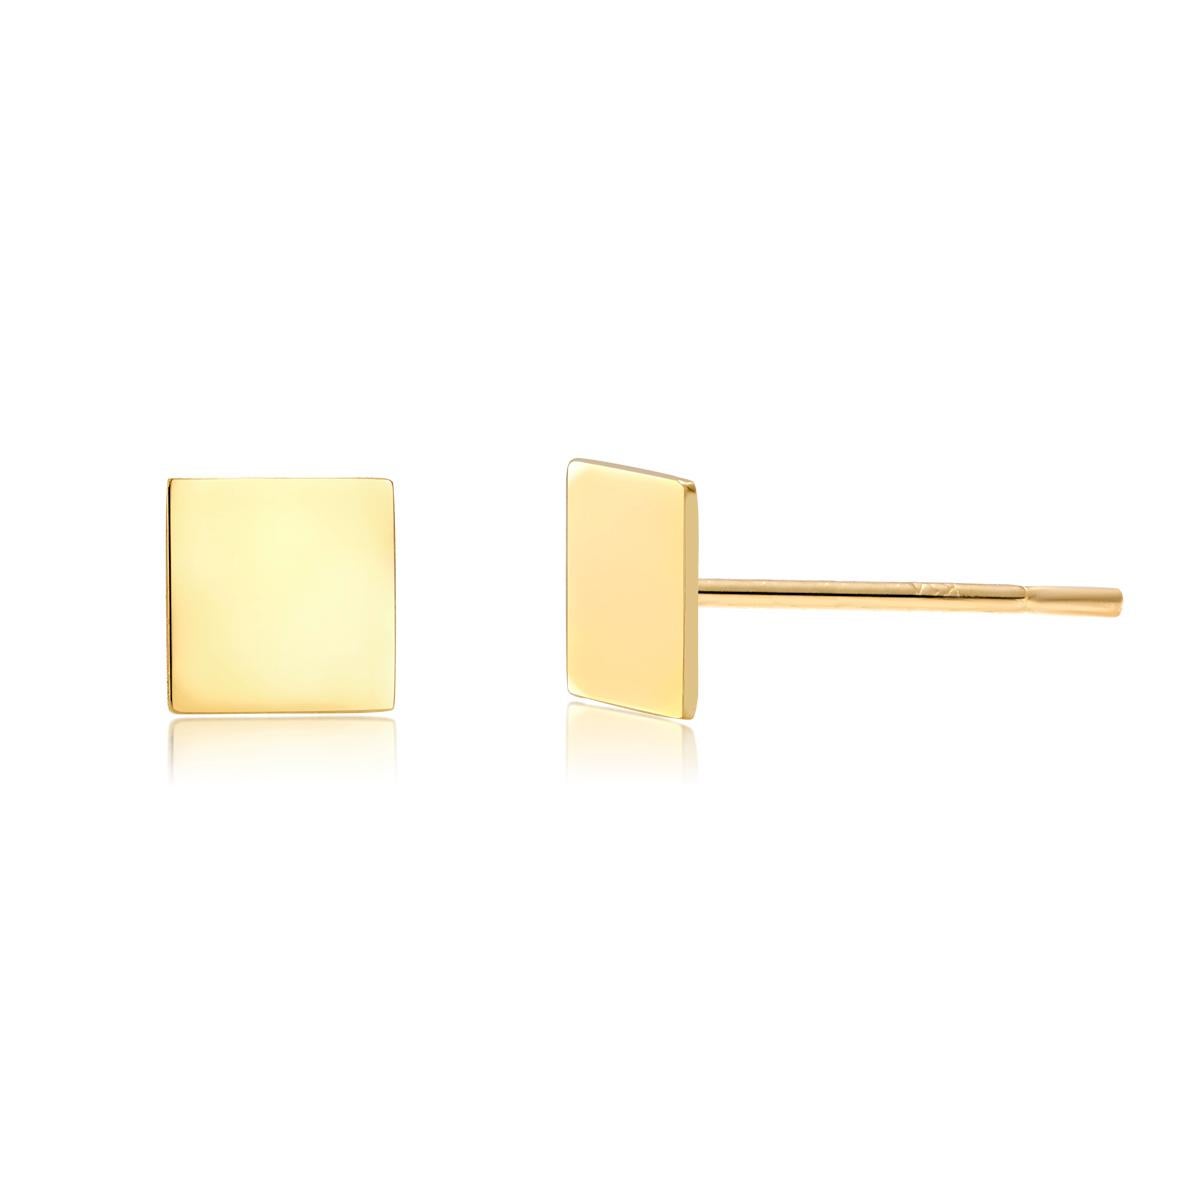 Contemporary 14 Karat Yellow Gold Square Shape Post Earrings